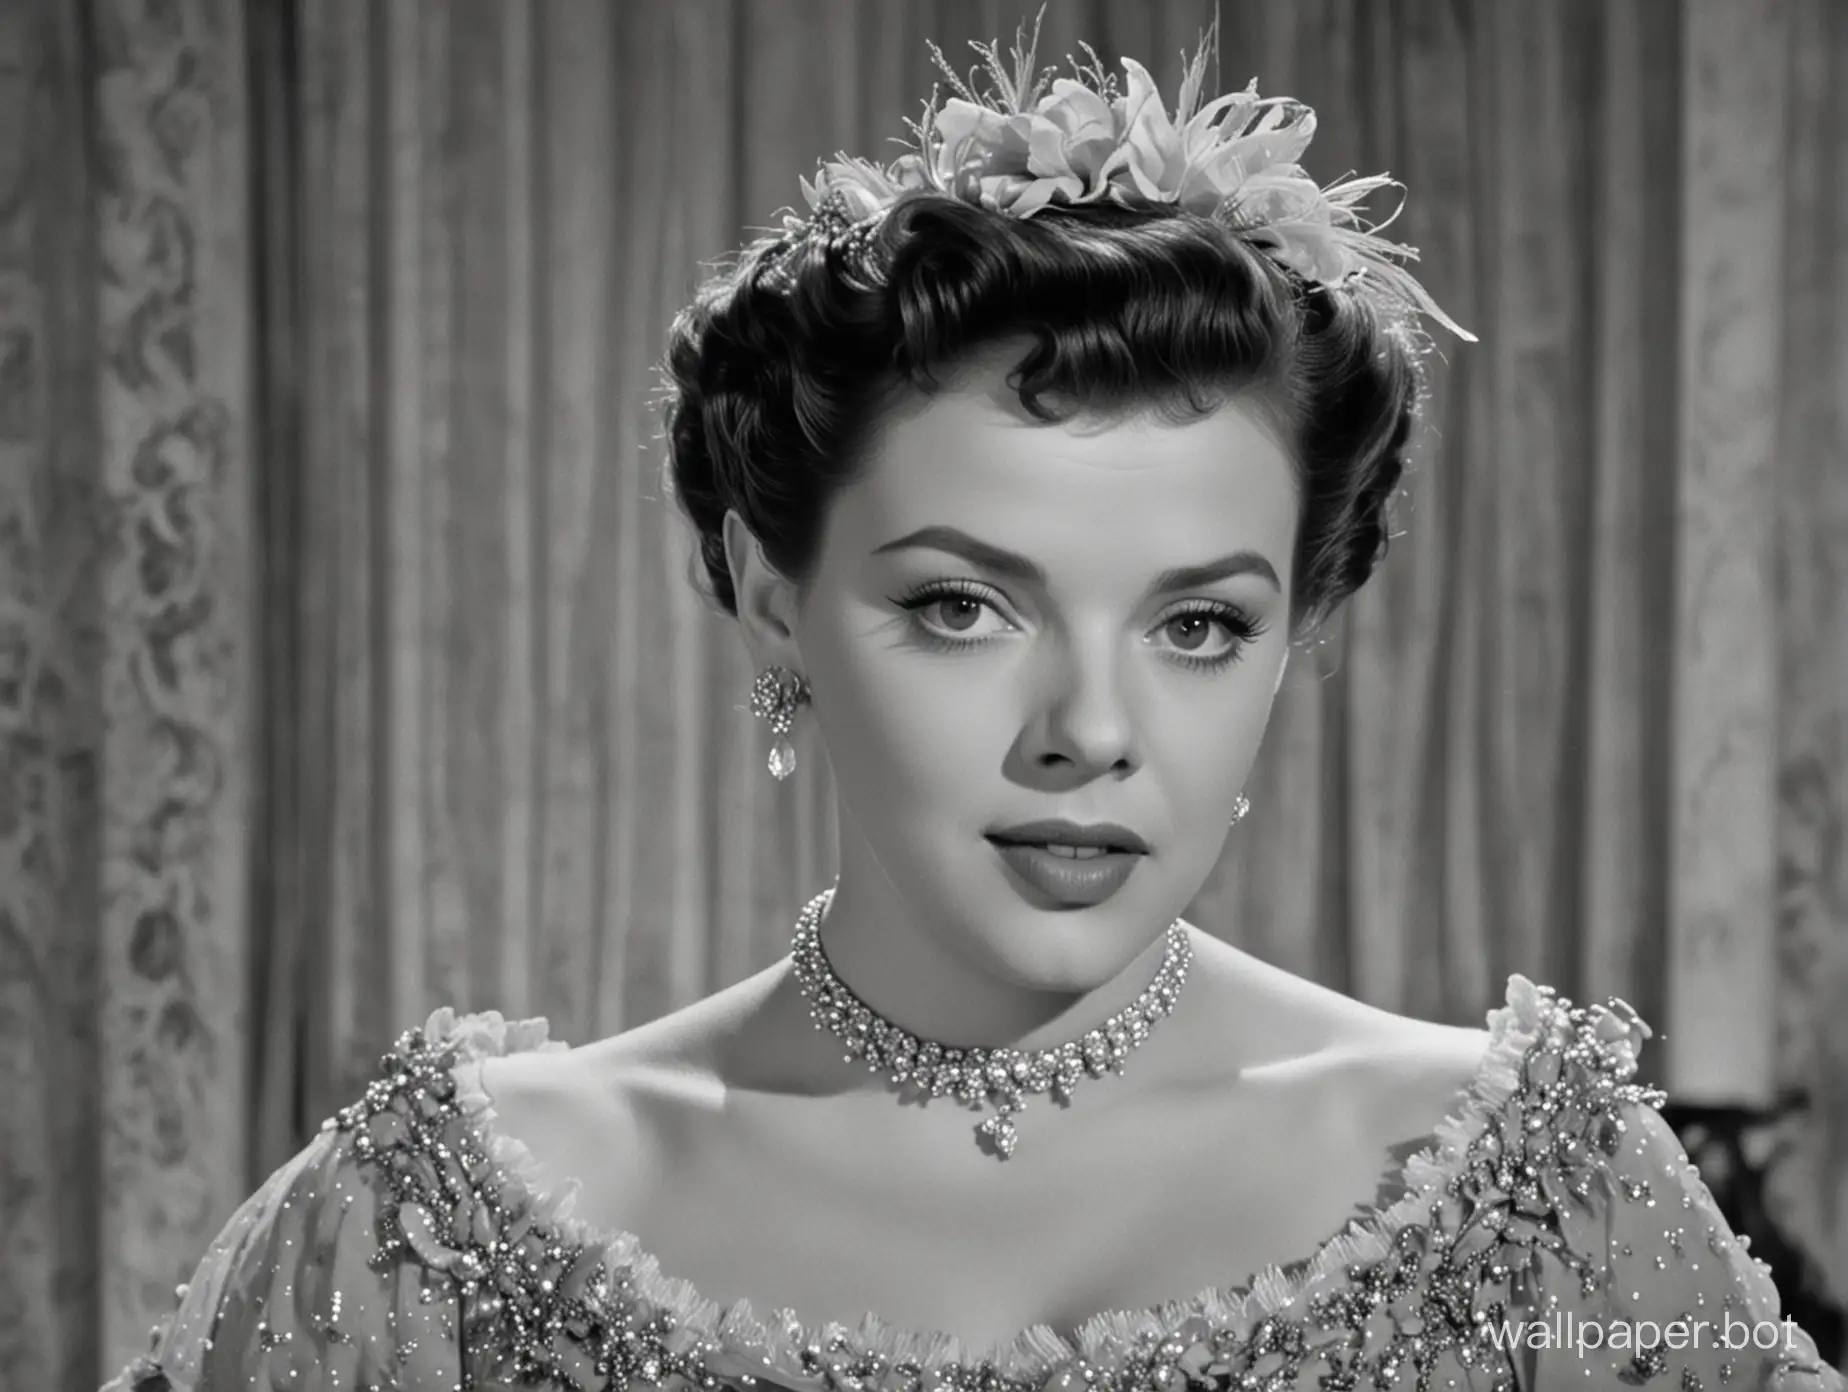 The magnificent Judy Garland is the most beautiful baroque